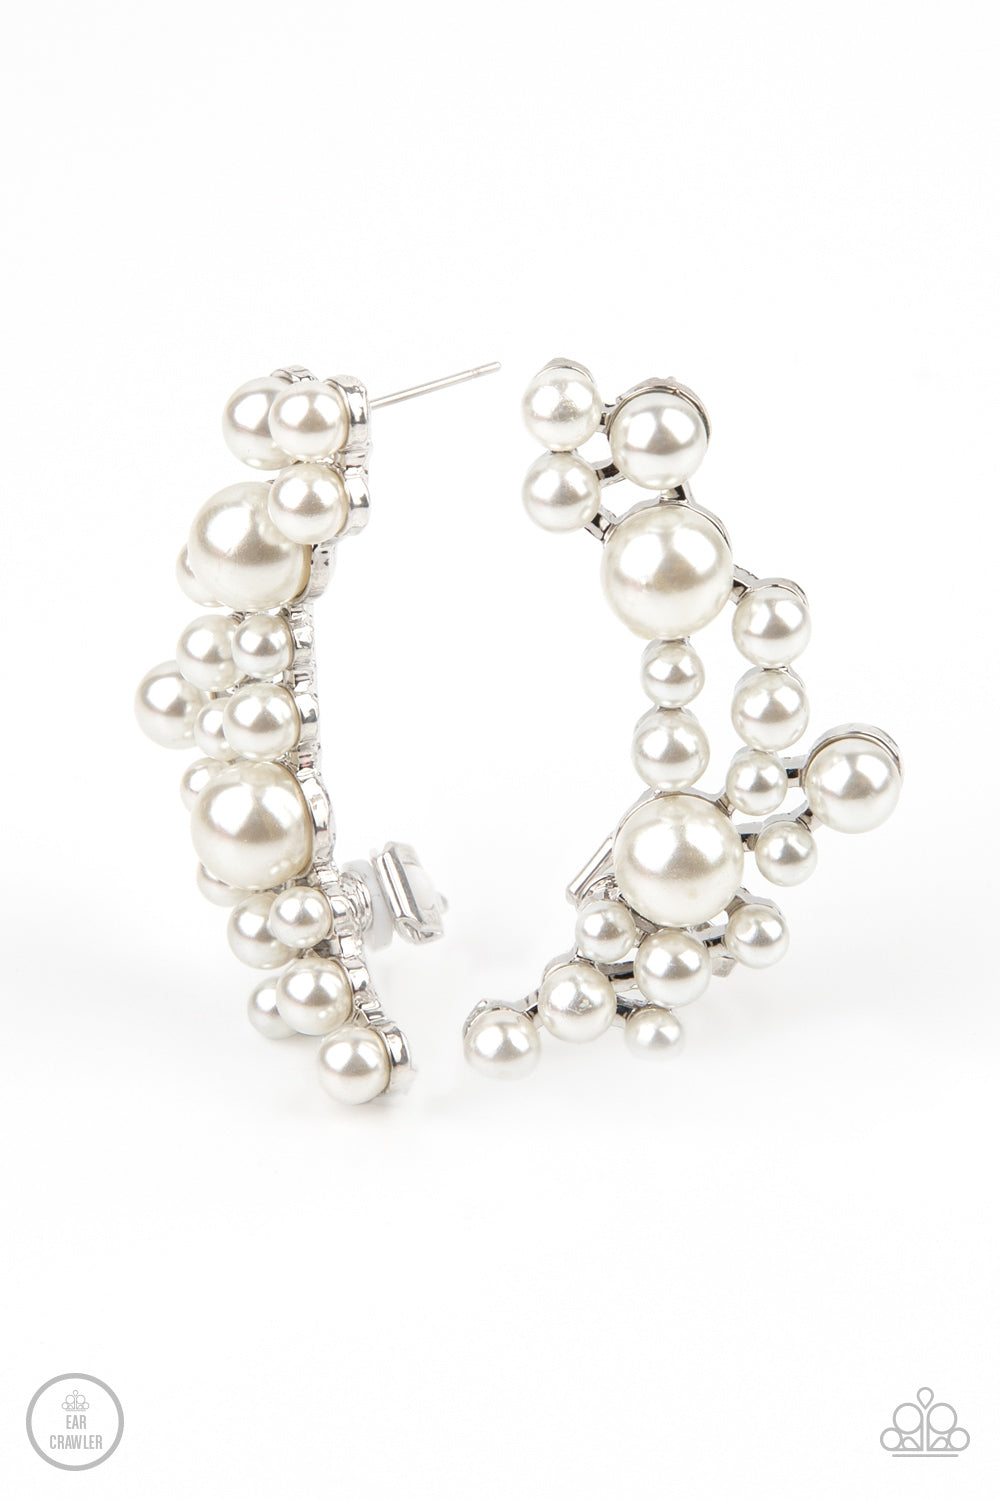 Metro Makeover White Ear Crawler Earring - Paparazzi Accessories A collection of bubbly white pearls dot a shiny silver frame that branches up the ear for a modern, timeless twist. Earring attaches to a standard post fitting. Features a clip-on fitting at the top for a secure fit. ﻿All Paparazzi Accessories are lead free and nickel free! Sold as one pair of ear crawlers.